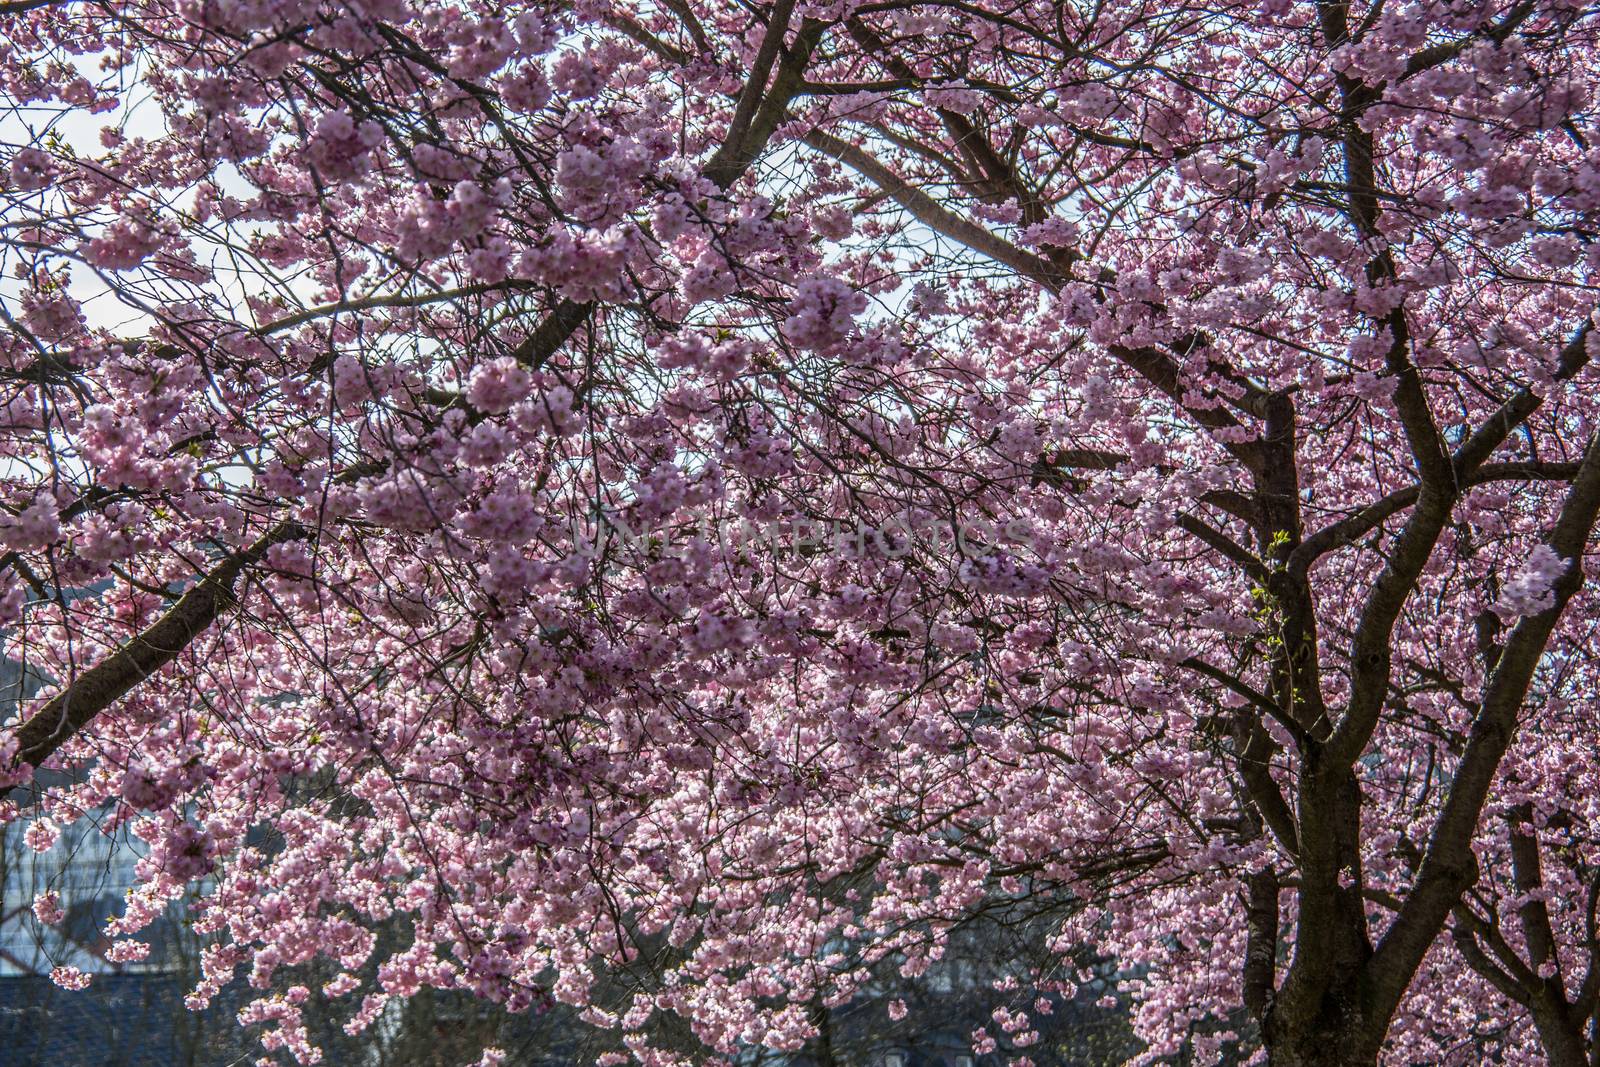 Japanese cherry blossom with pink flowers in spring